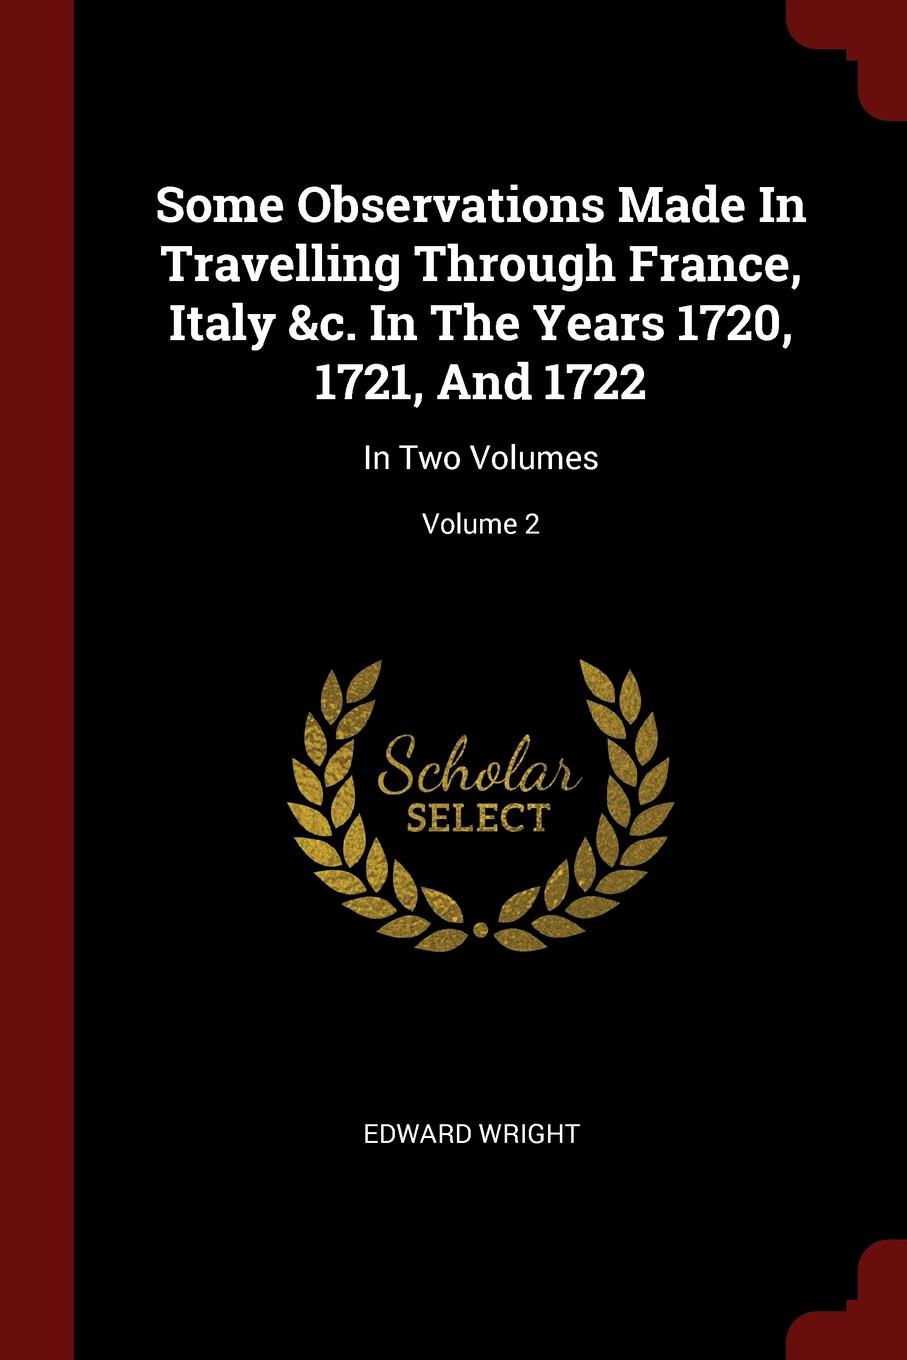 Some Observations Made In Travelling Through France, Italy .c. In The Years 1720, 1721, And 1722. In Two Volumes; Volume 2